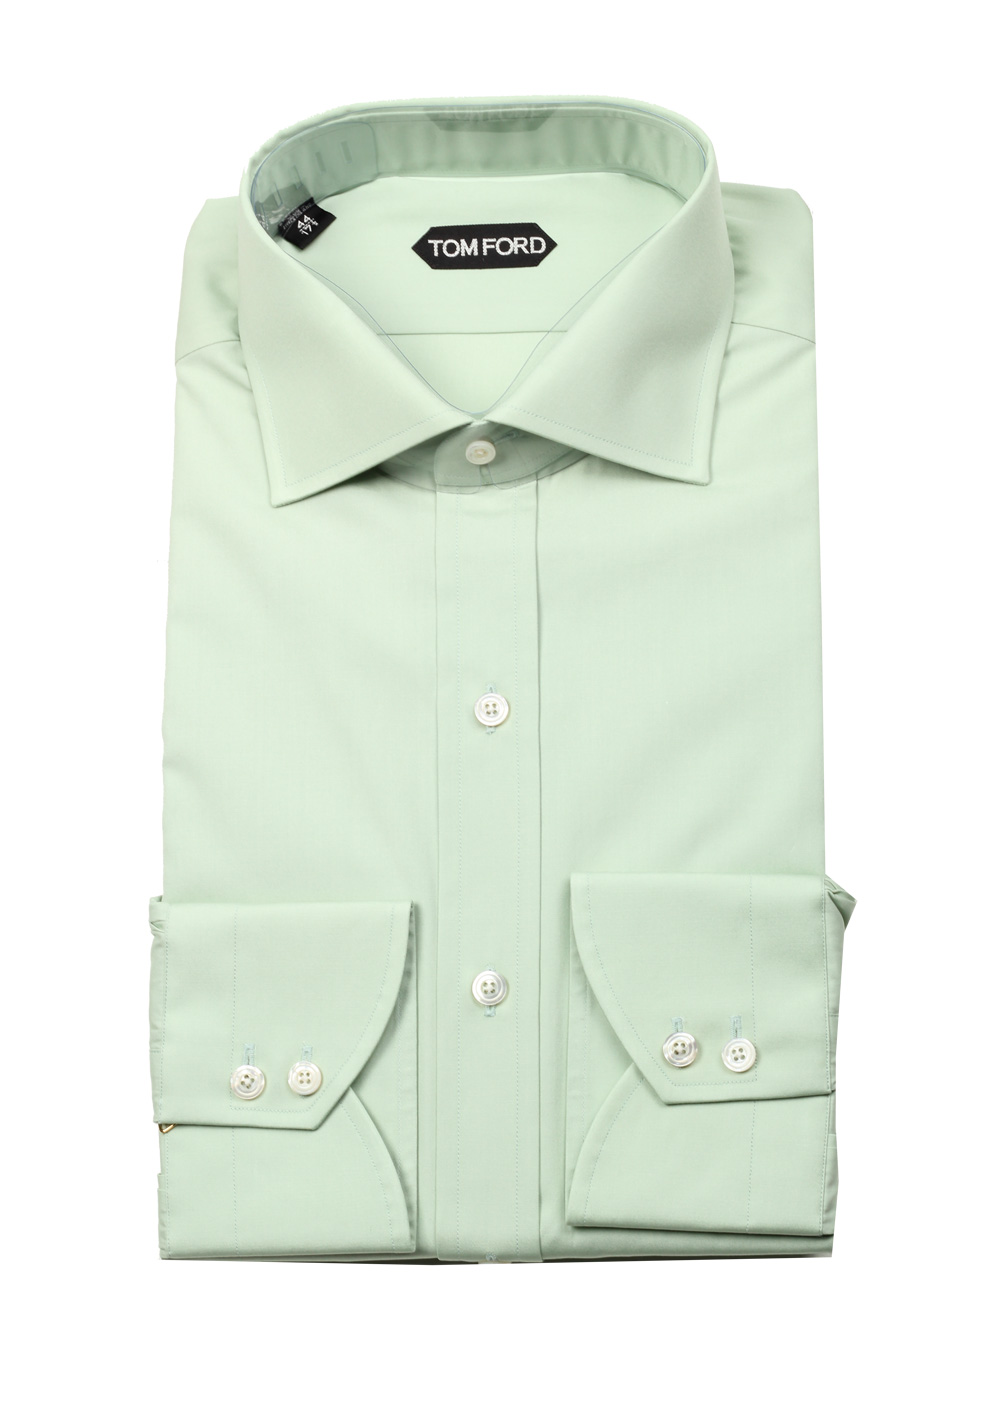 TOM FORD Solid Blue Green Shirt Size 44 / 17,5 U.S. | Costume Limité